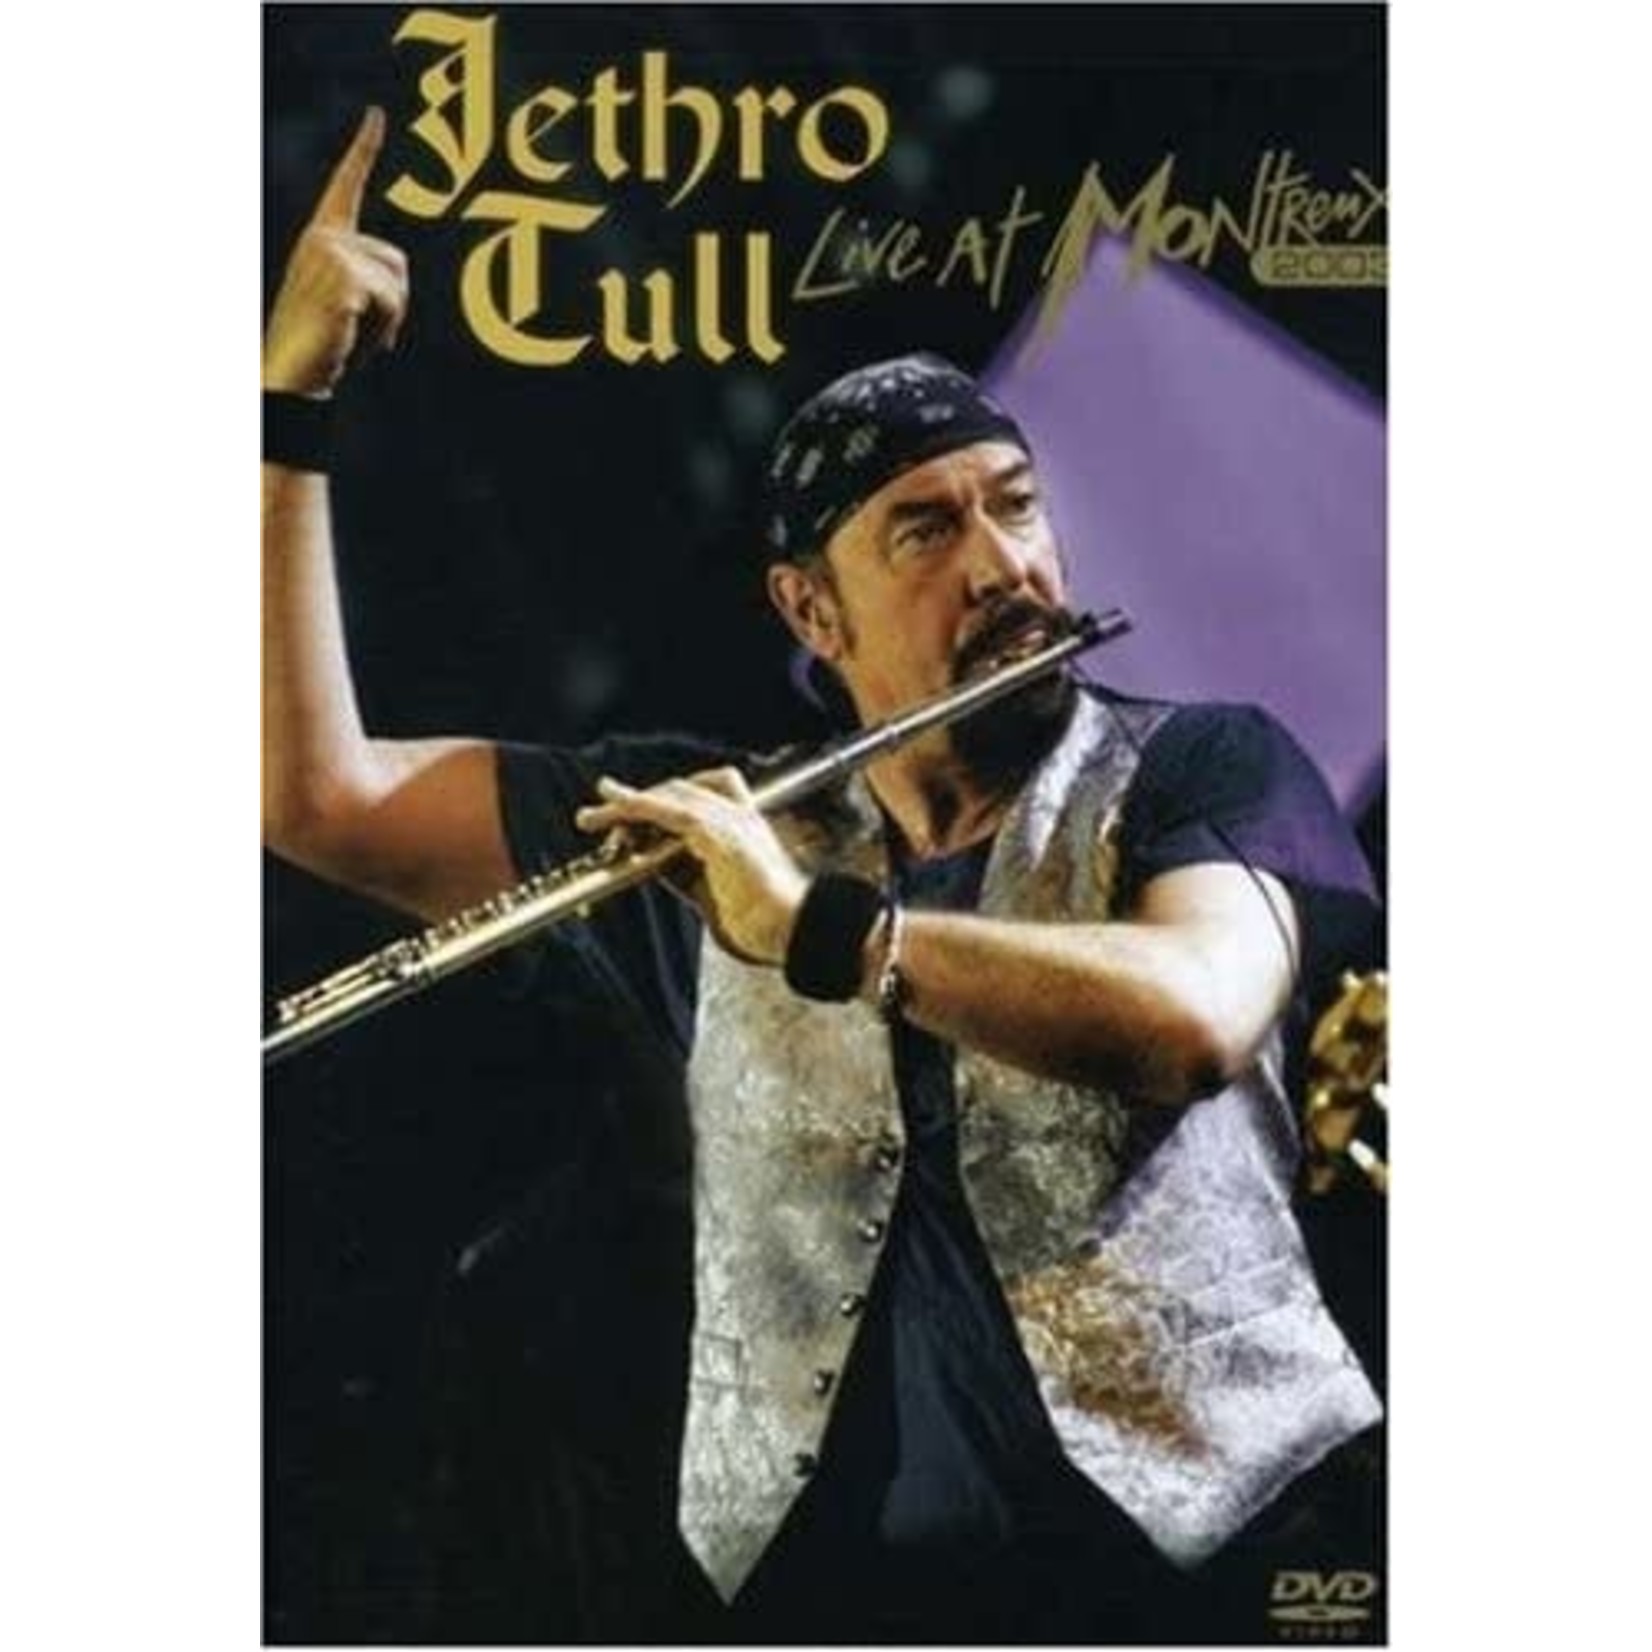 Jethro Tull - Live At Montreux 2003 [USED DVD]